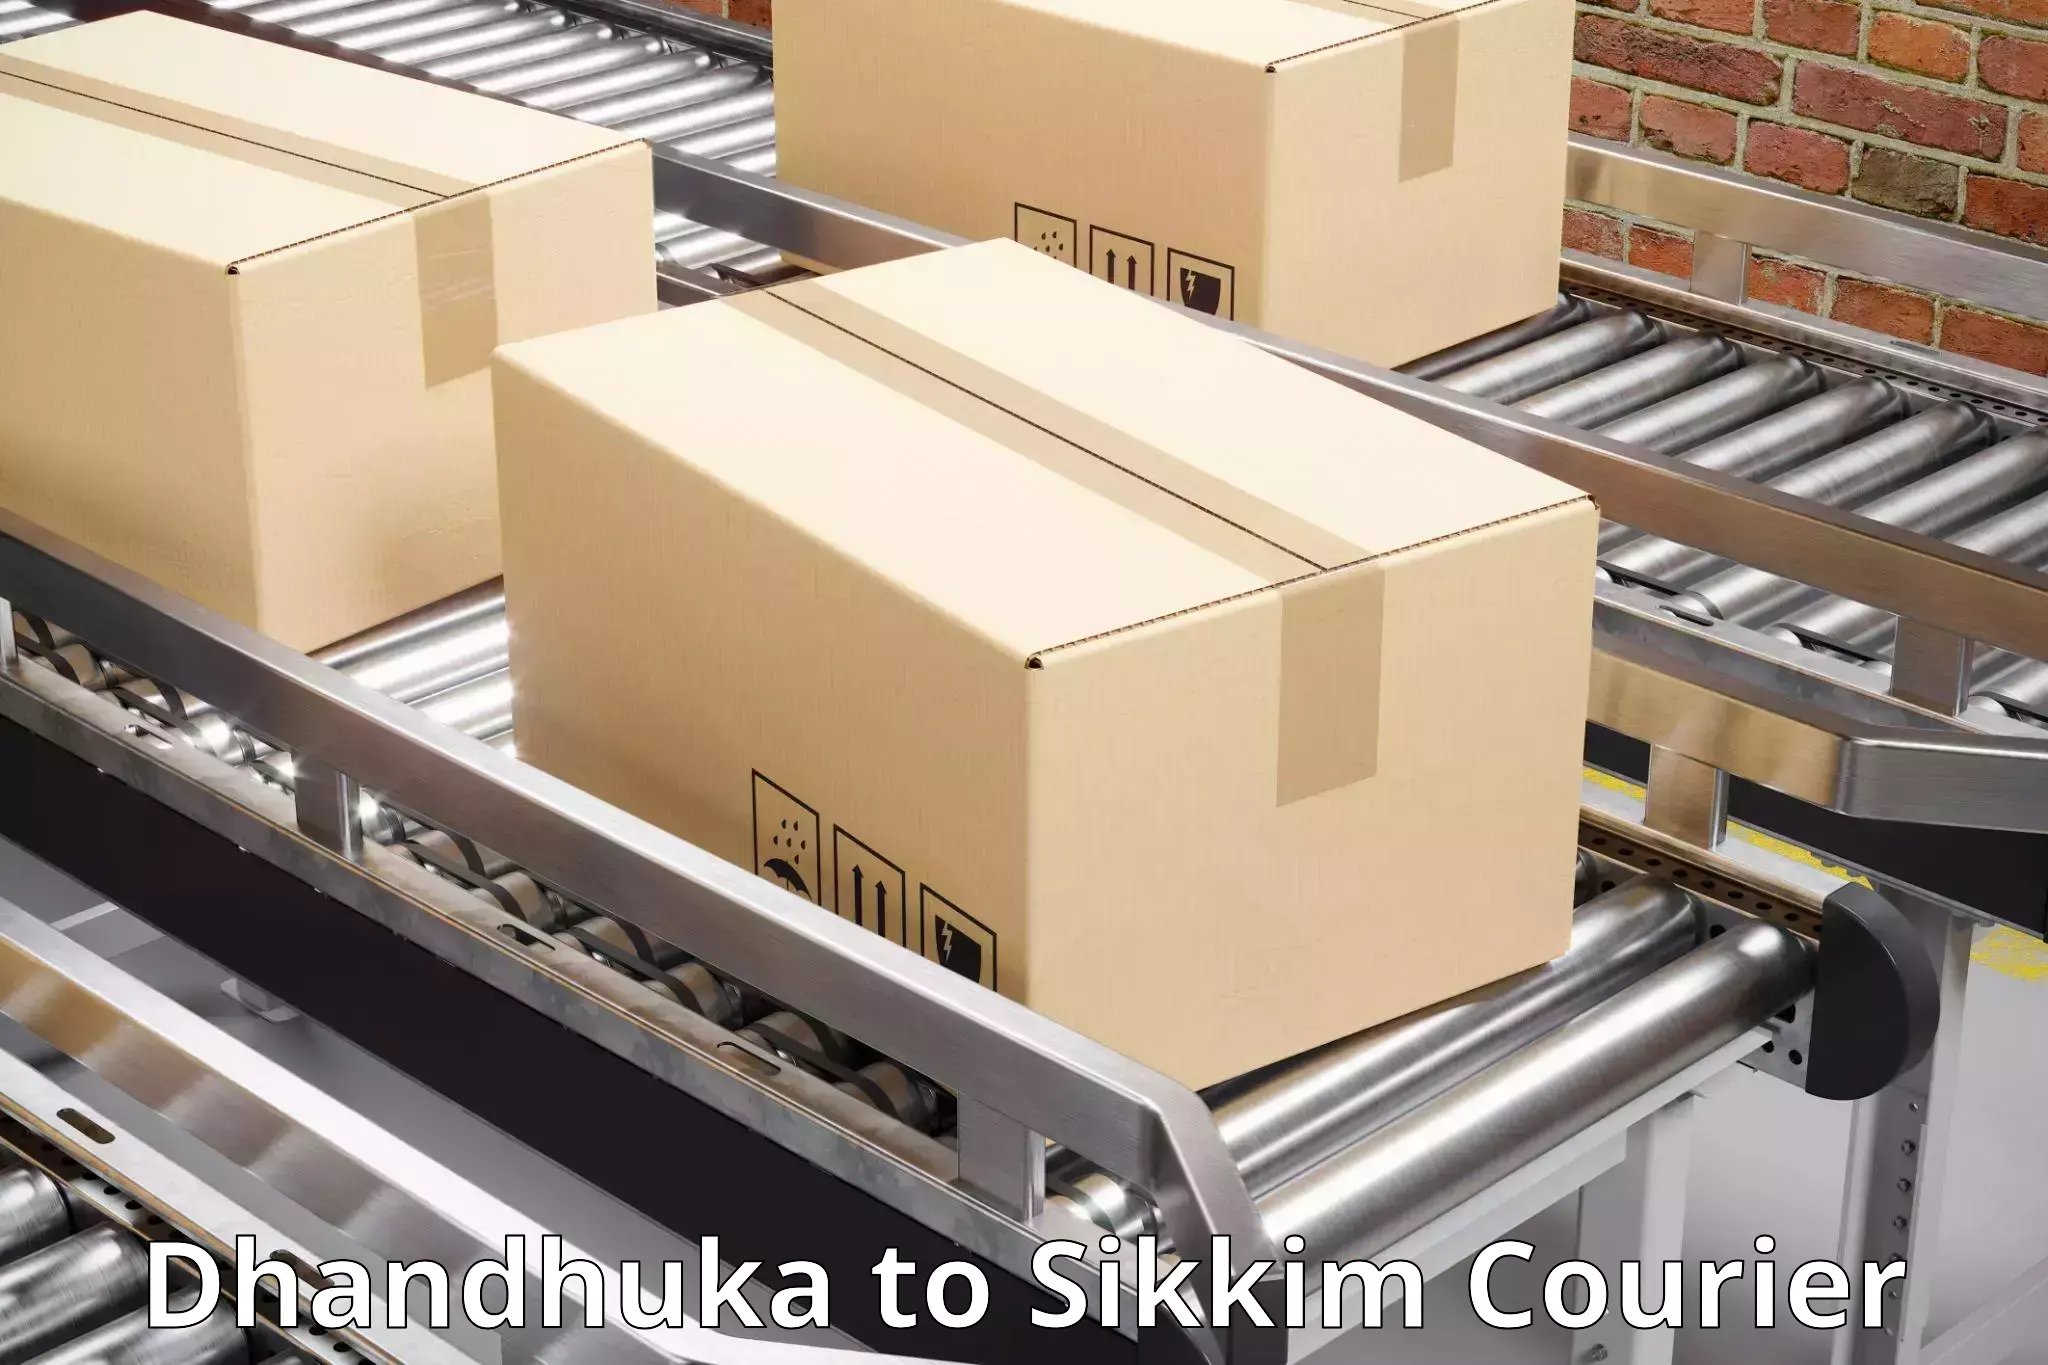 On-demand shipping options Dhandhuka to Pelling